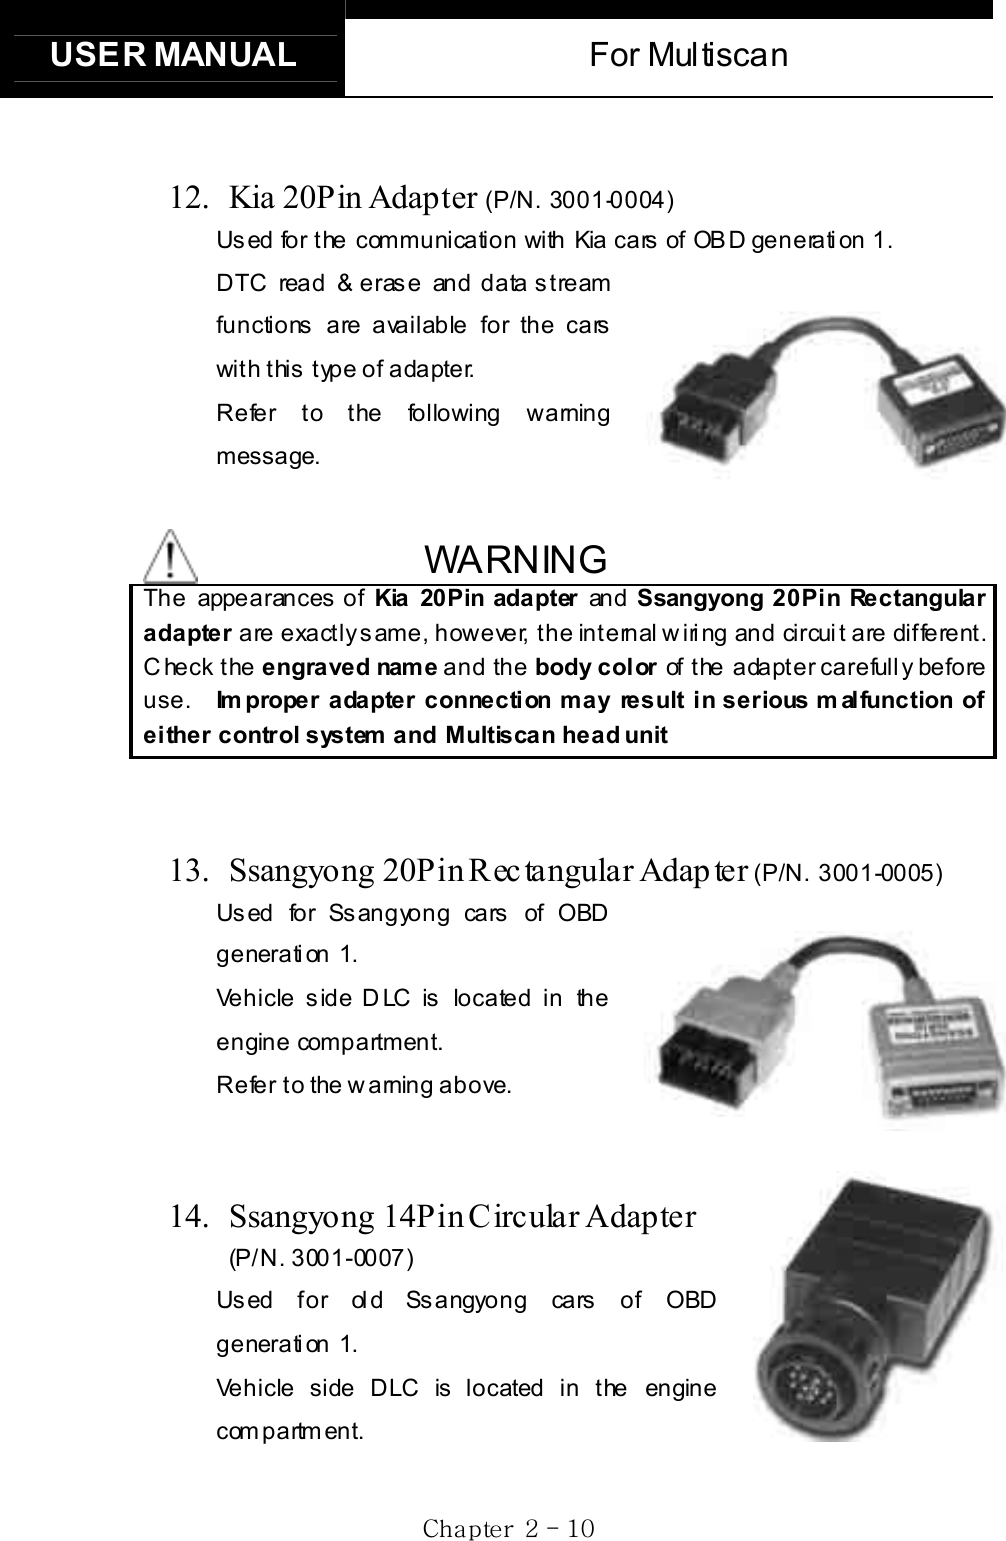 USER MANUAL  For Multiscan Gj  GYG TGXWG     12.  Kia 20Pin Adapter (P/N. 3001-0004)Us ed for the communication with Kia cars  of  OB D generati on 1.   DTC read &amp; erase and data stream functions are available for the cars with this type of adapter. Refer to the following warning message. WARNING The appearances of Kia 20Pin adapter and Ssangyong 20Pin Rectangular adapter are exactly same, however, the internal wiring and circuit are different. C heck the engraved name and the body color of the adapter carefully before use.  Improper adapter connection may result in serious m alfunction of either control system  and Multiscan head unit13.  Ssangyong 20Pin Rec tangular Adap ter (P/N. 3001-0005)Used for Ssangyong cars of OBD generation 1. Vehicle side DLC is located in the engine compartment. Refer to  the warning above. 14. Ssangyong 14Pin Circular Adapter (P/N. 3001-0007)Used for old Ssangyong cars of OBD generation 1. Vehicle side DLC is located in the engine compartment. 